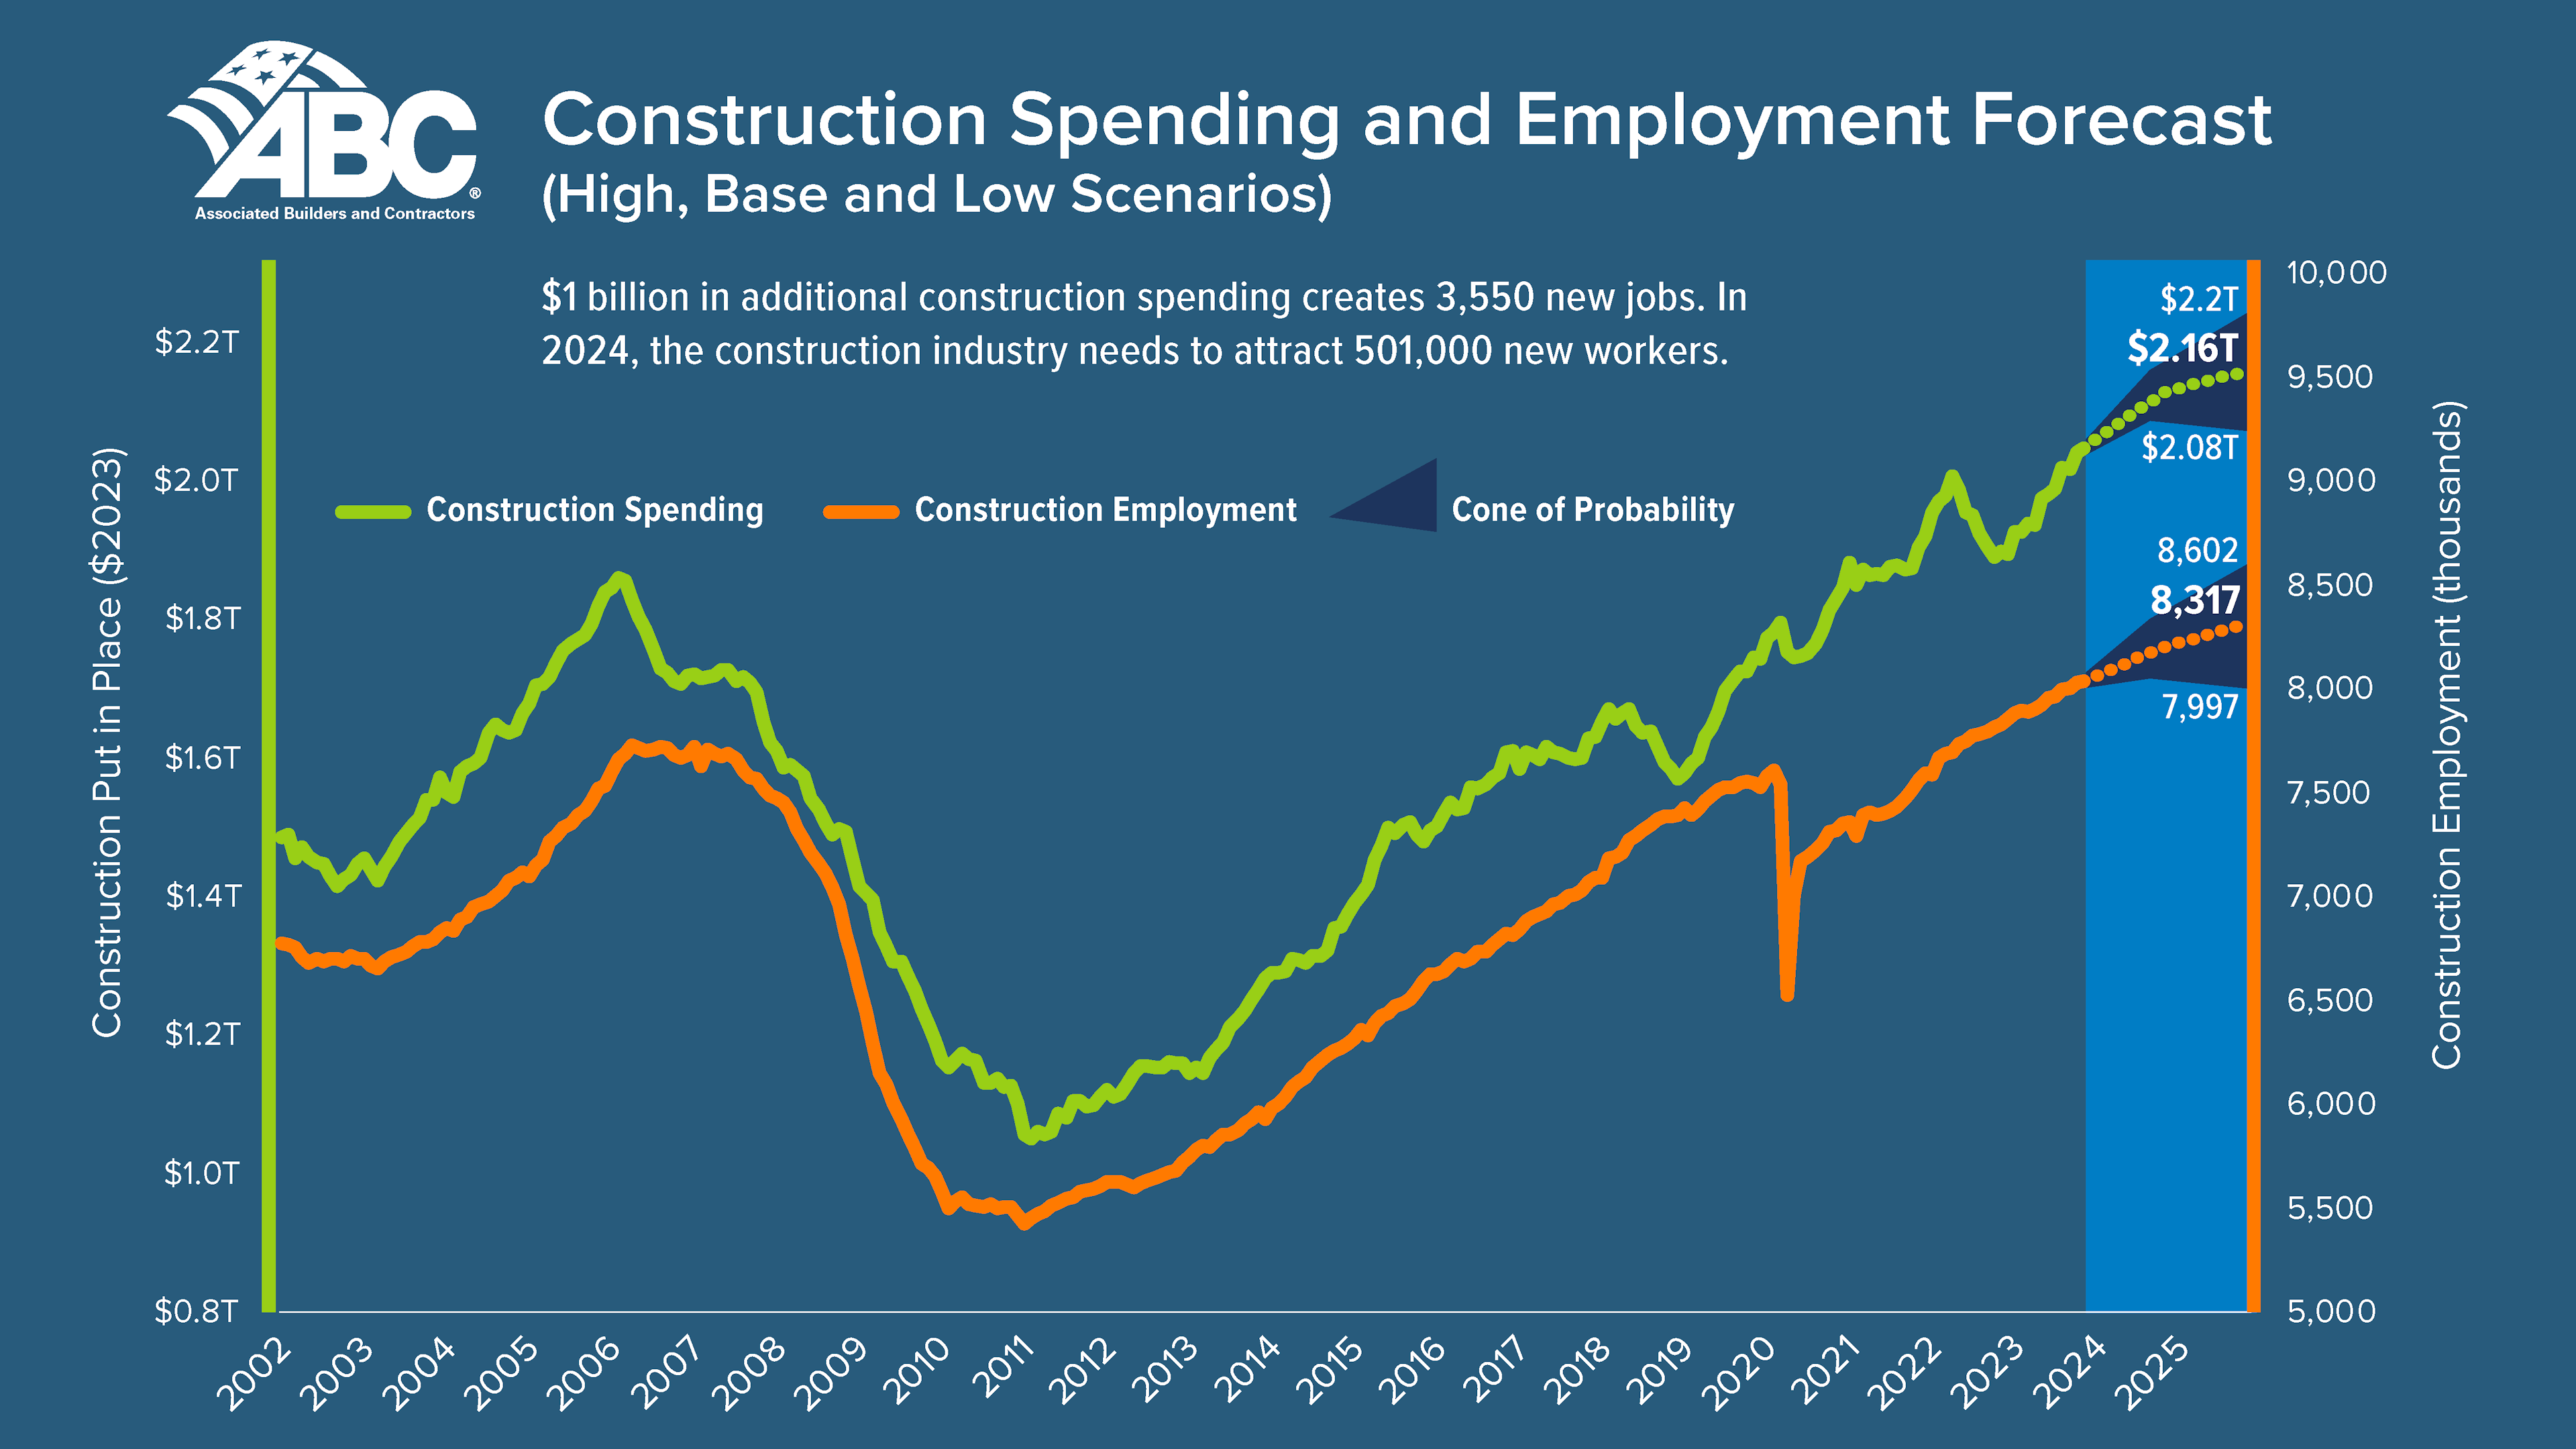 Construction Industry Faces Critical Labor Shortage in 2024: Over 500,000 Workers Needed